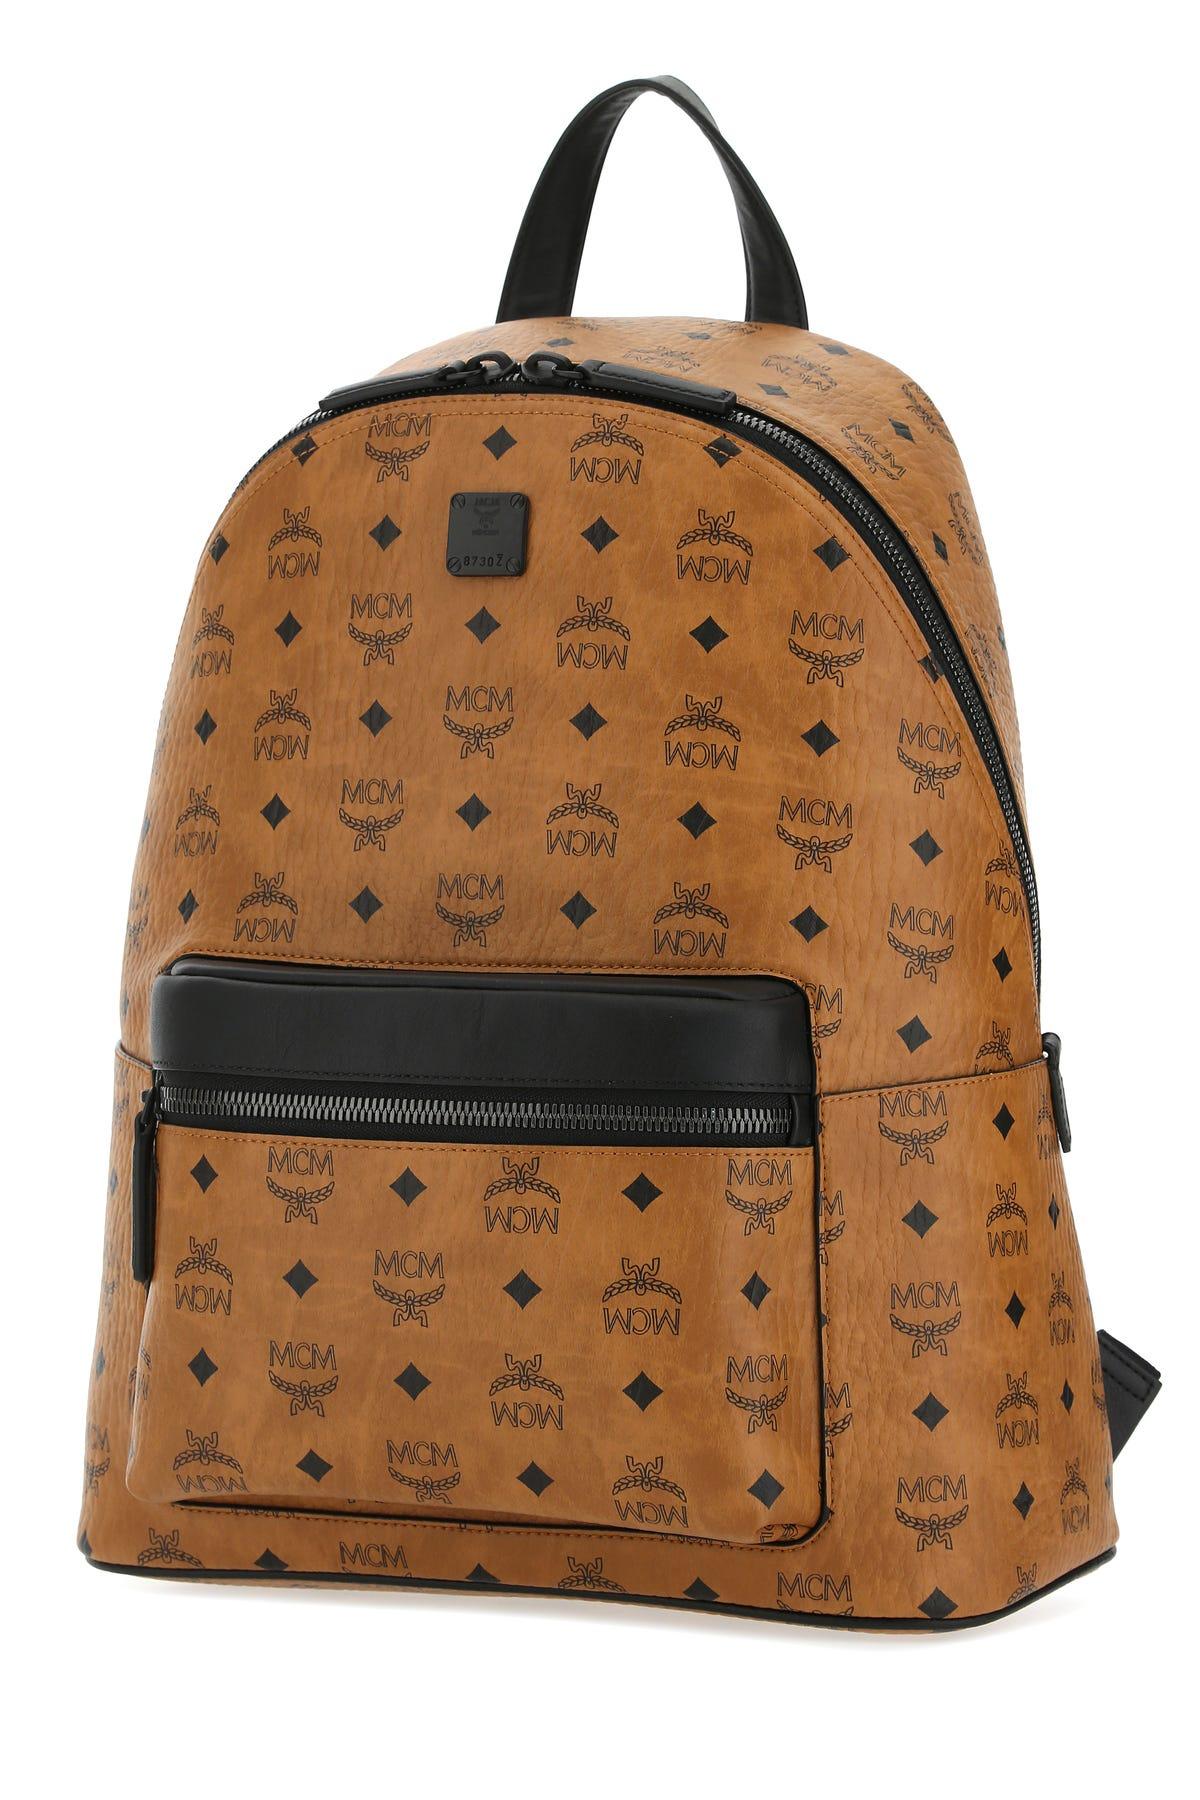 MCM Canvas Stark Backpack in Brown | Lyst